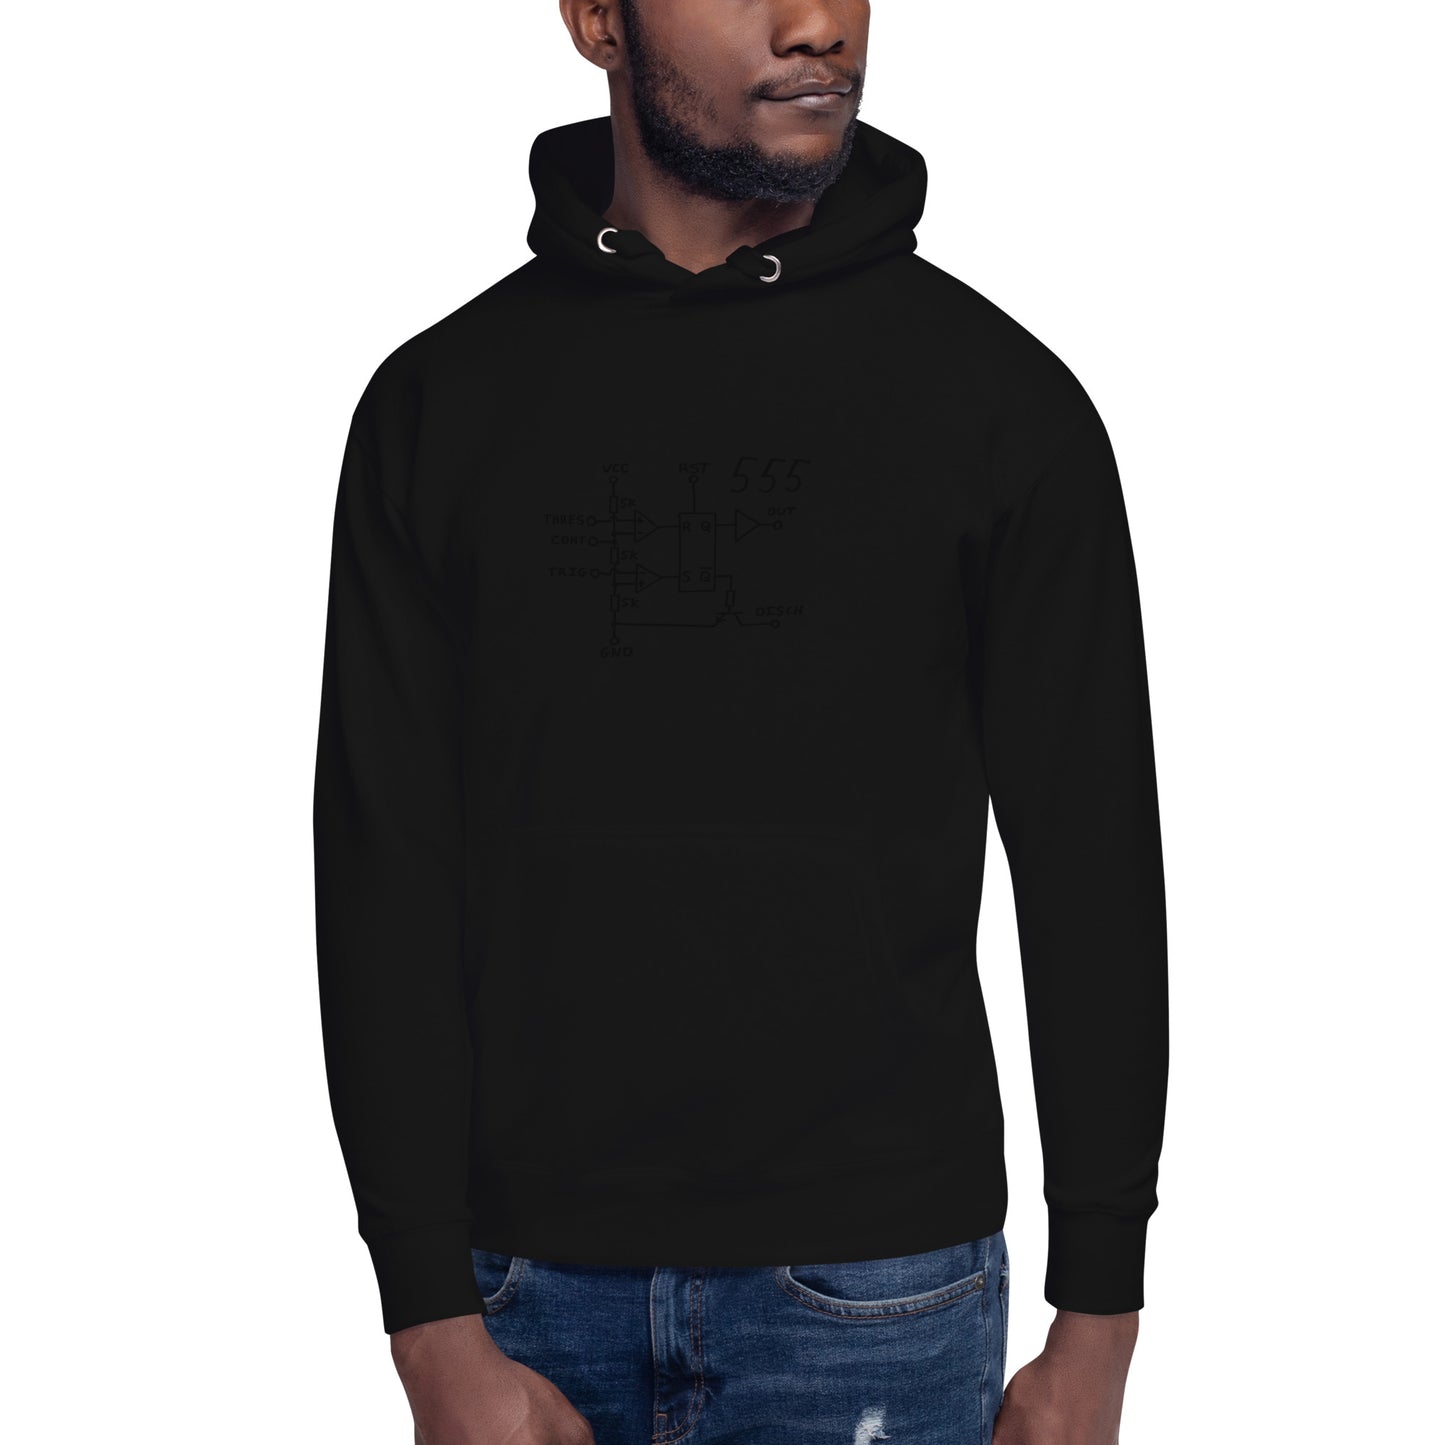 Classic 555 Timer Chip Schematic Circuit Hoodie - Black Logo